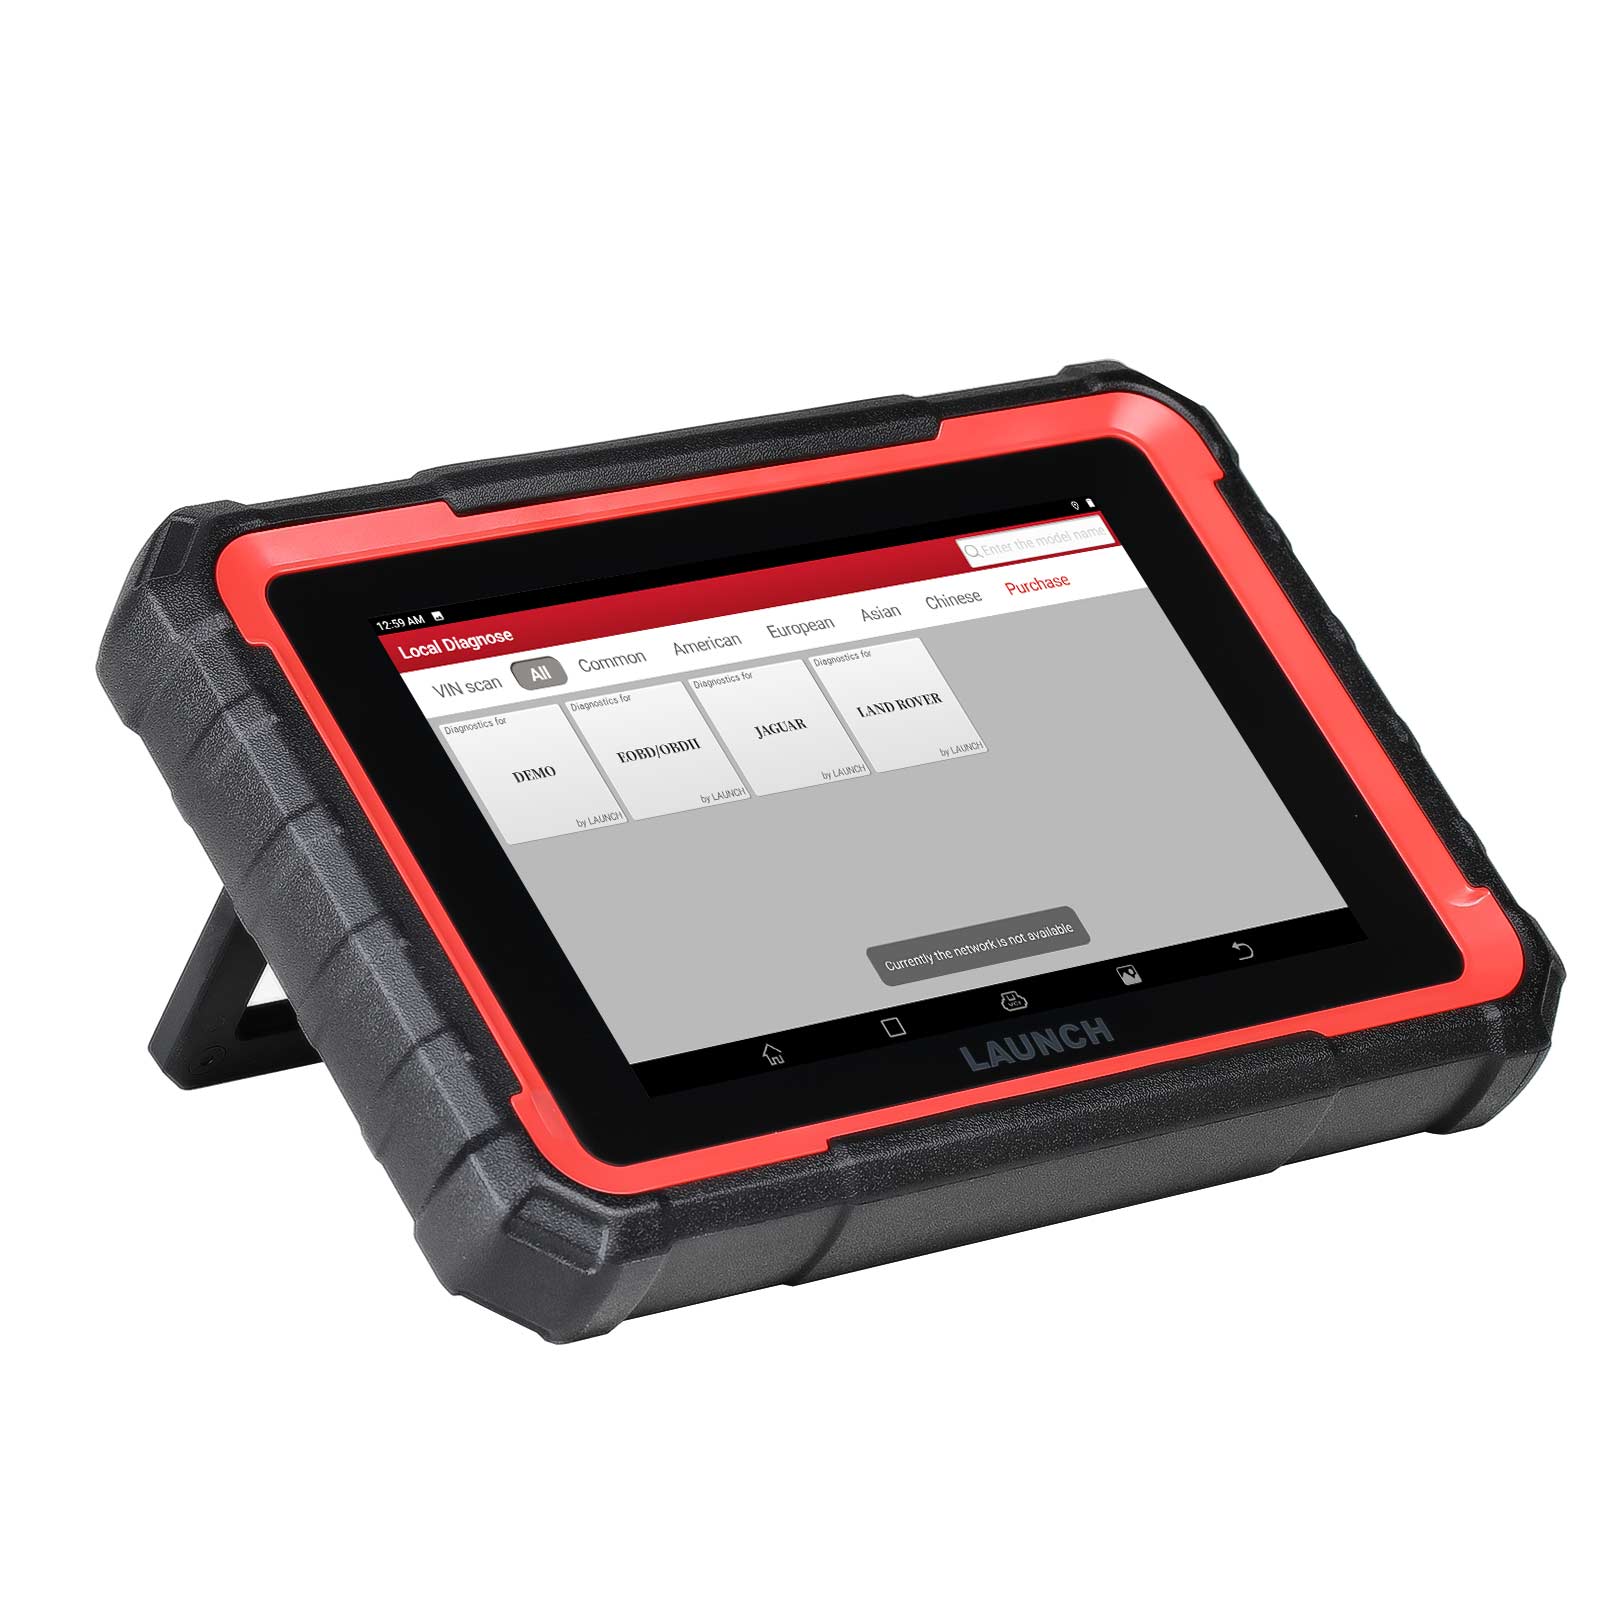 Newest Launch X431 PRO ELITE Full System Auto Diagnostic Tools CAN